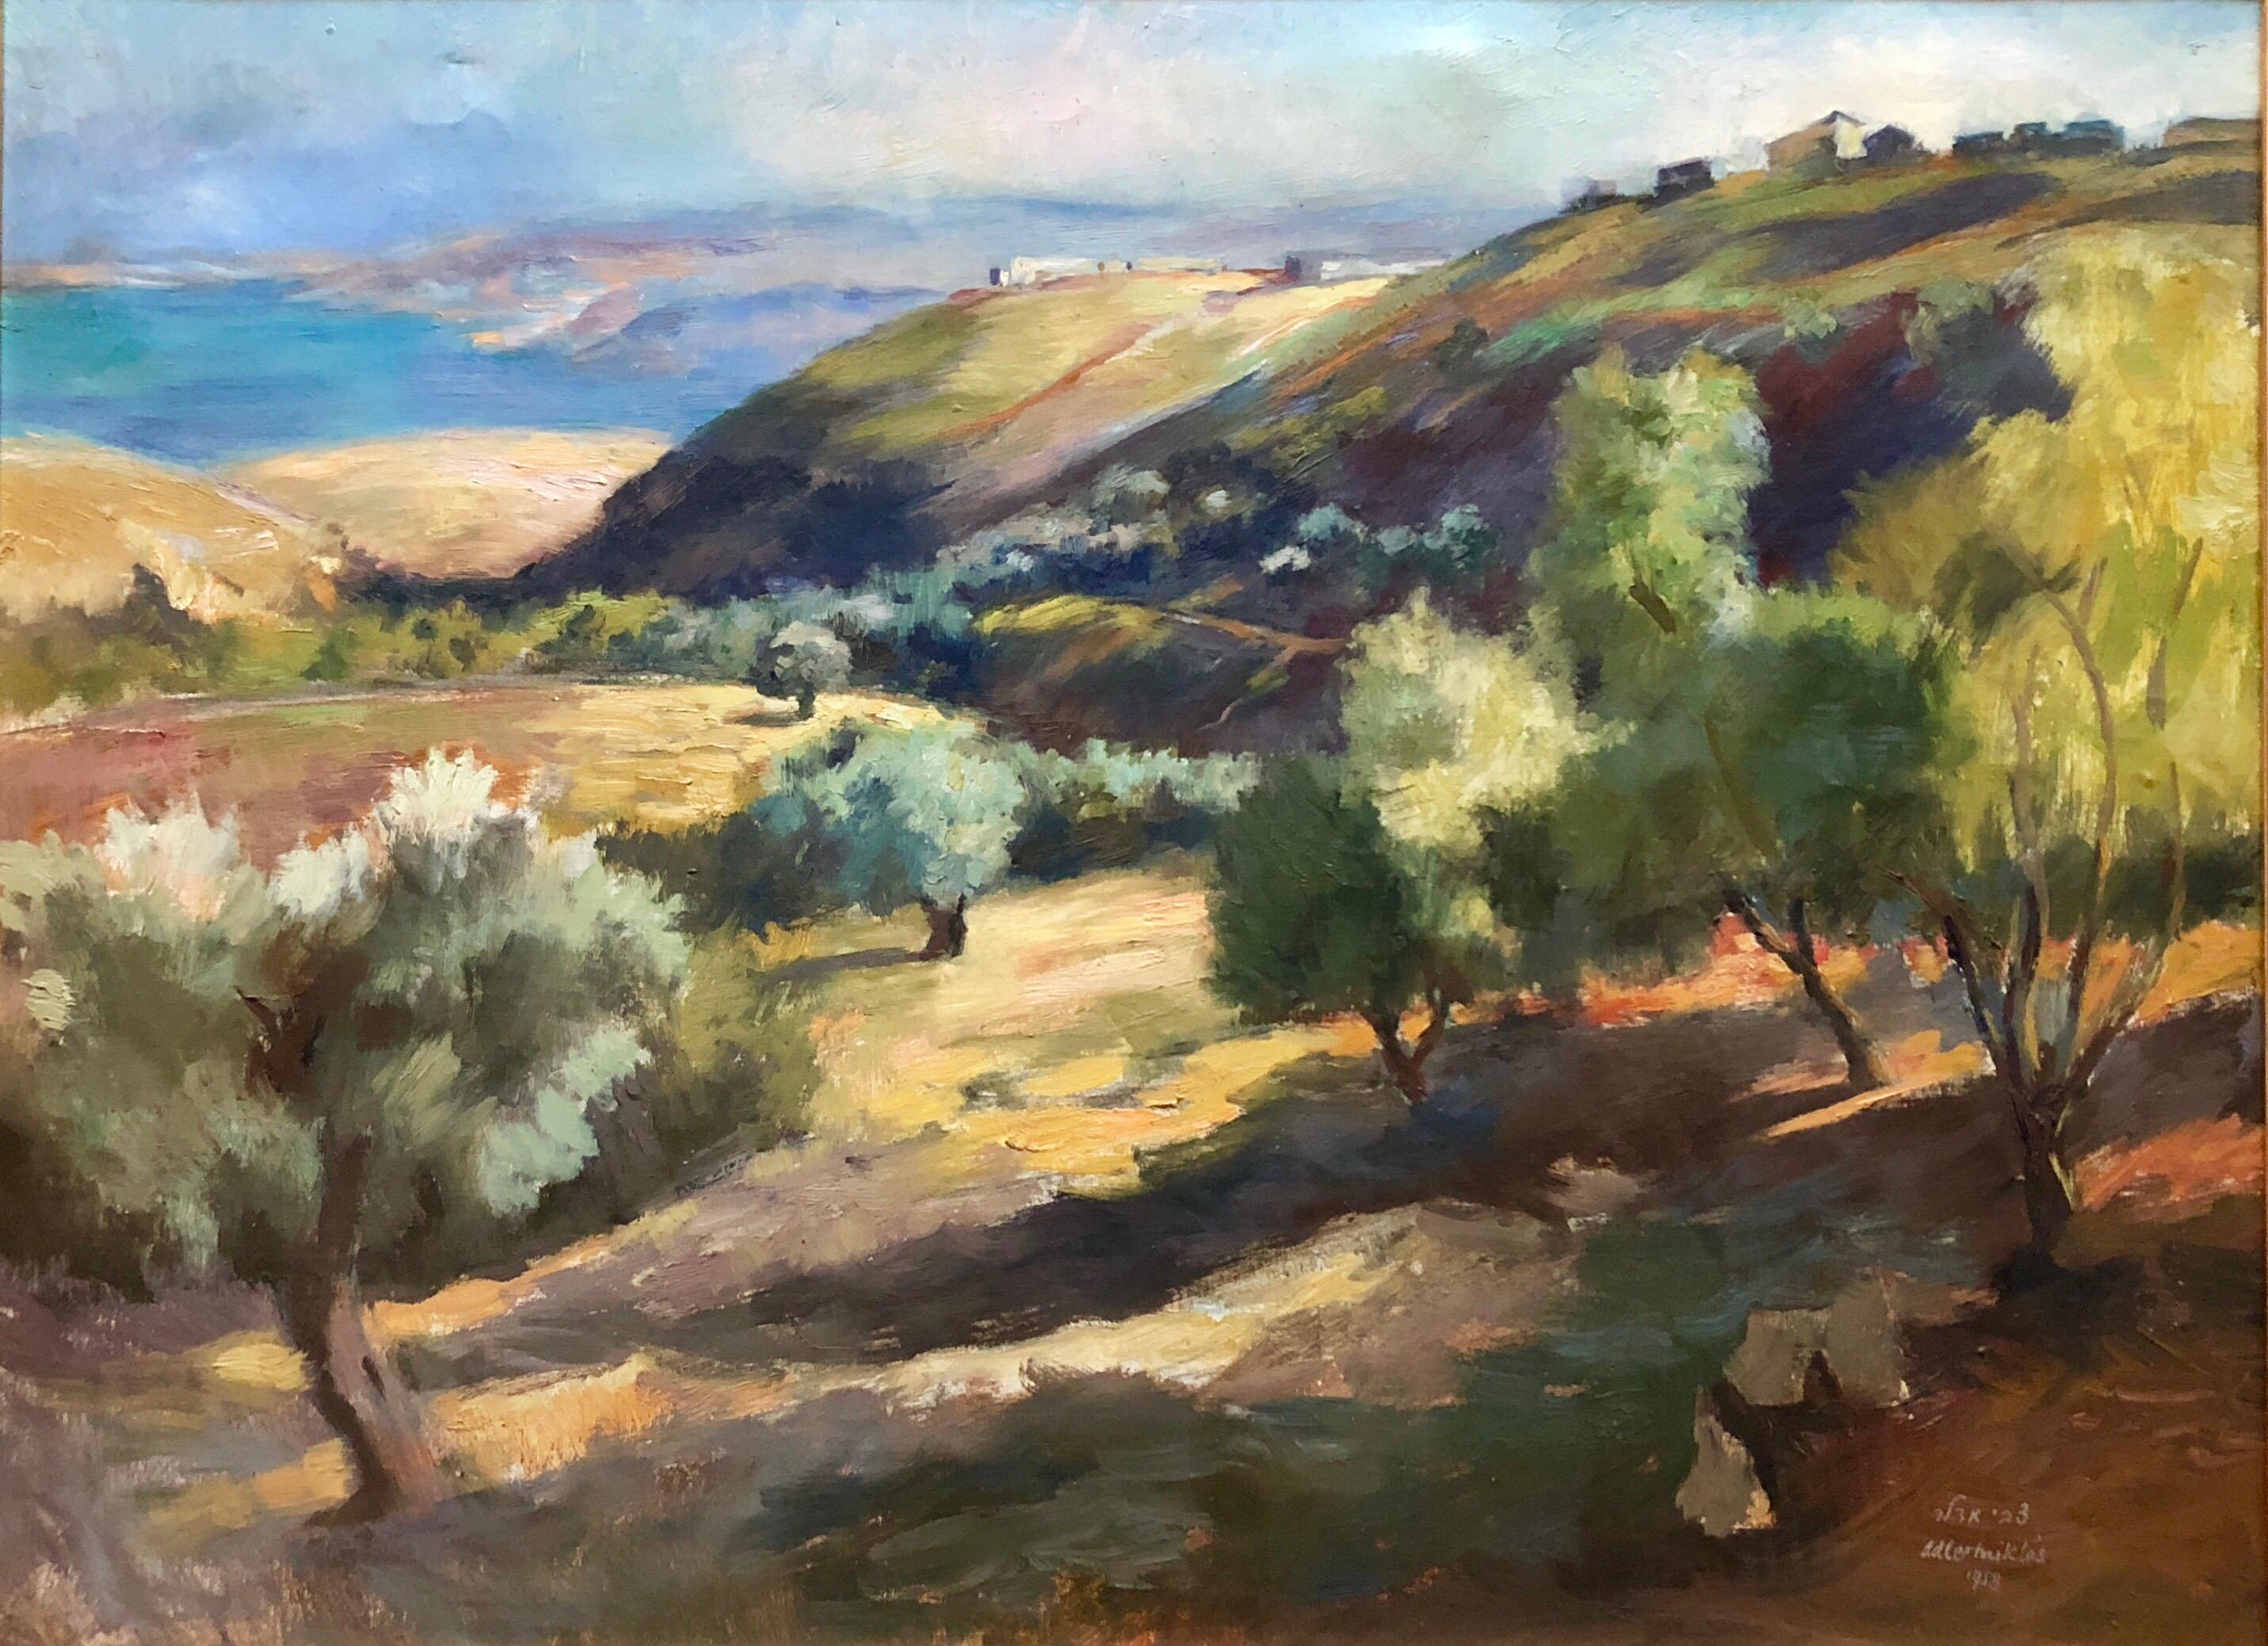 In this painting the artist depicts the verdant hillsides outside Jerusalem, the use of complementary colors next to each other makes them appear more vibrant and and allows for the perspective to be slightly exaggerated.
Signed and titled in